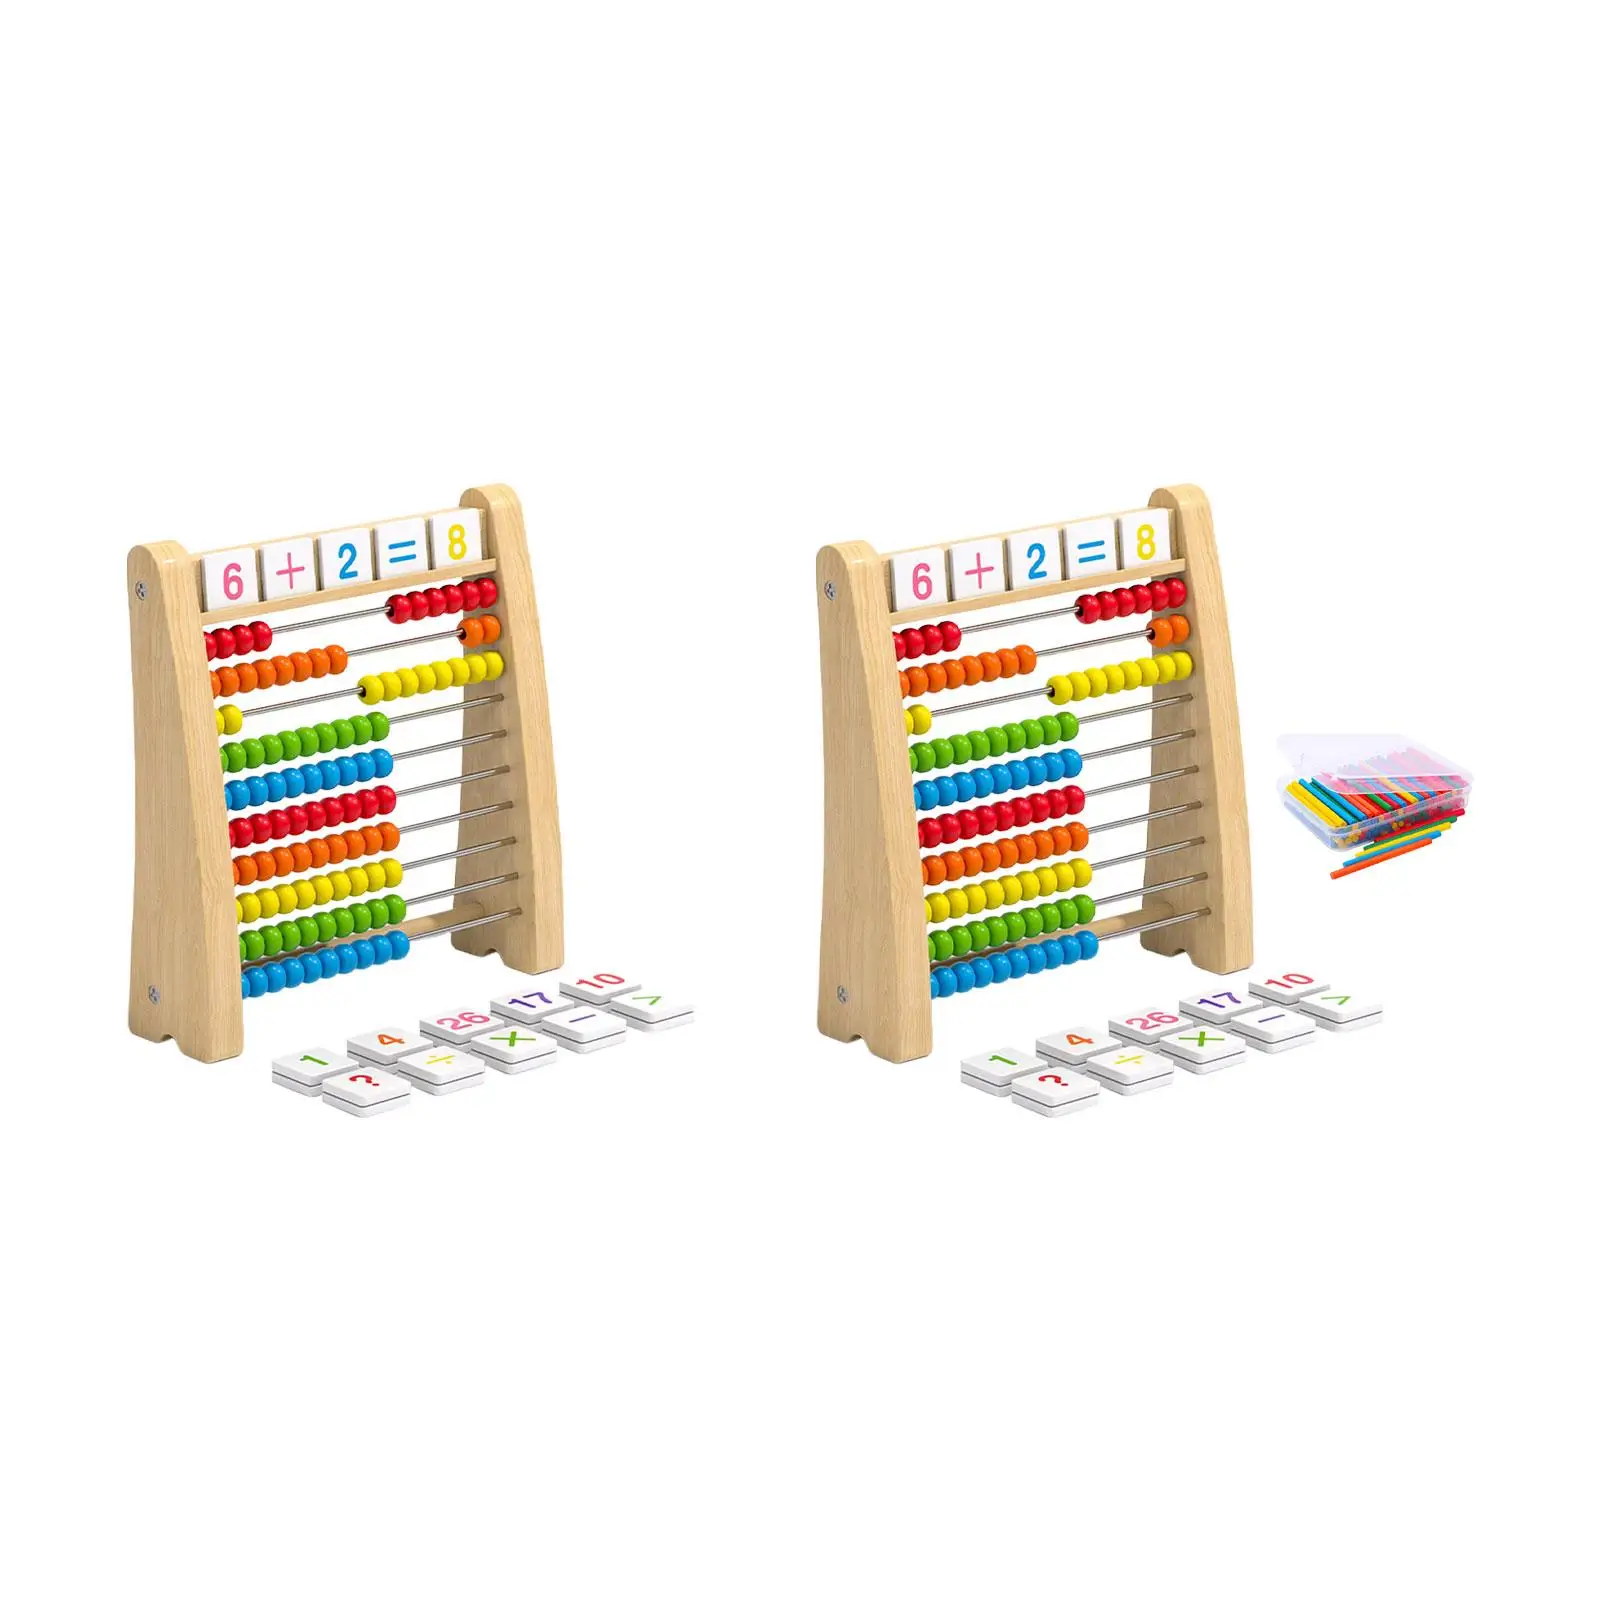 Classic Wooden Abacus Ten Frame Set Math Counters for Kids with Number Cards Educational Counting Toy for Children Preschool